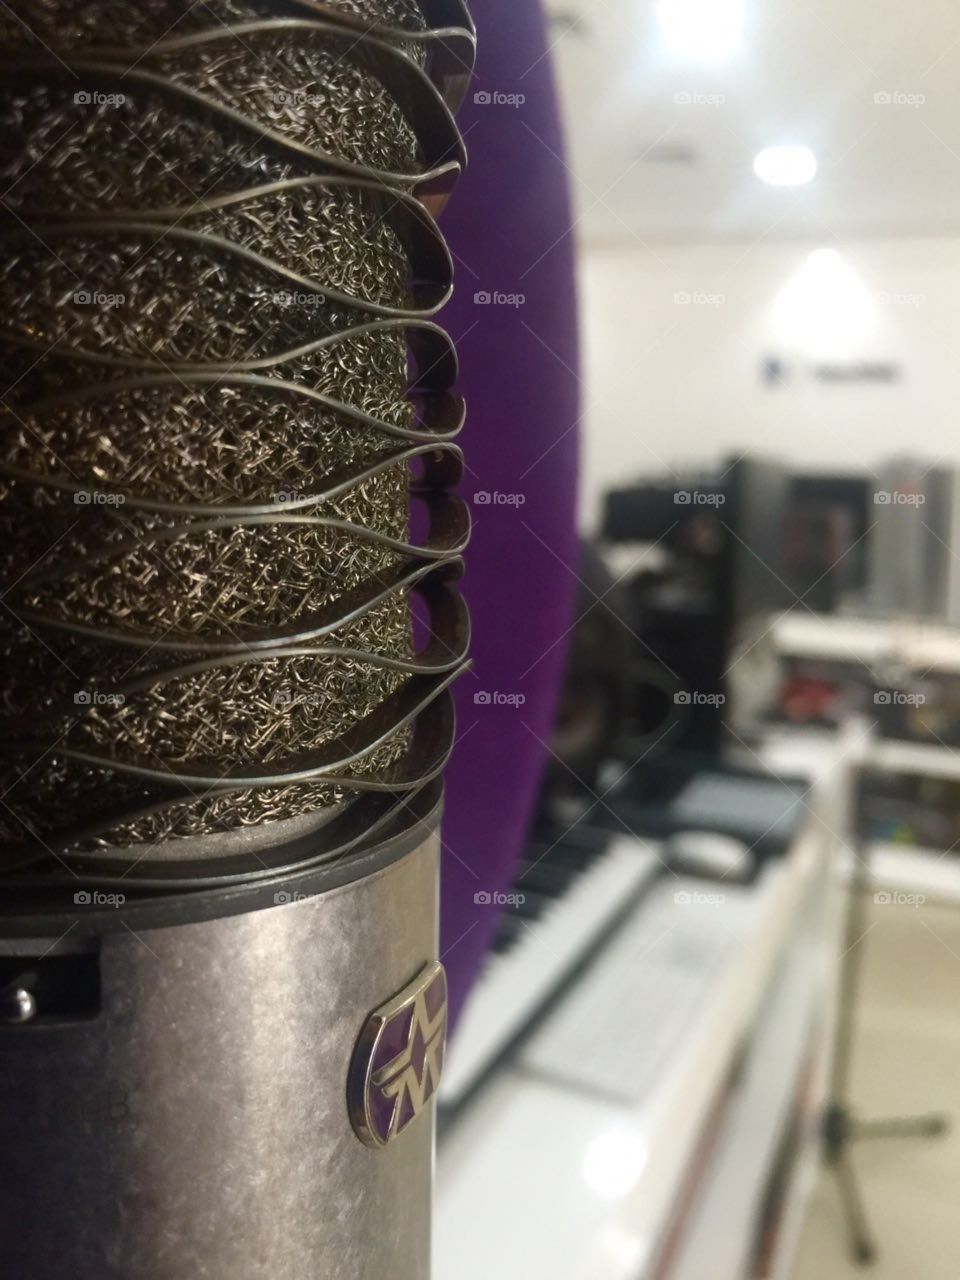 Condenser Mic
Suitable for all recordings